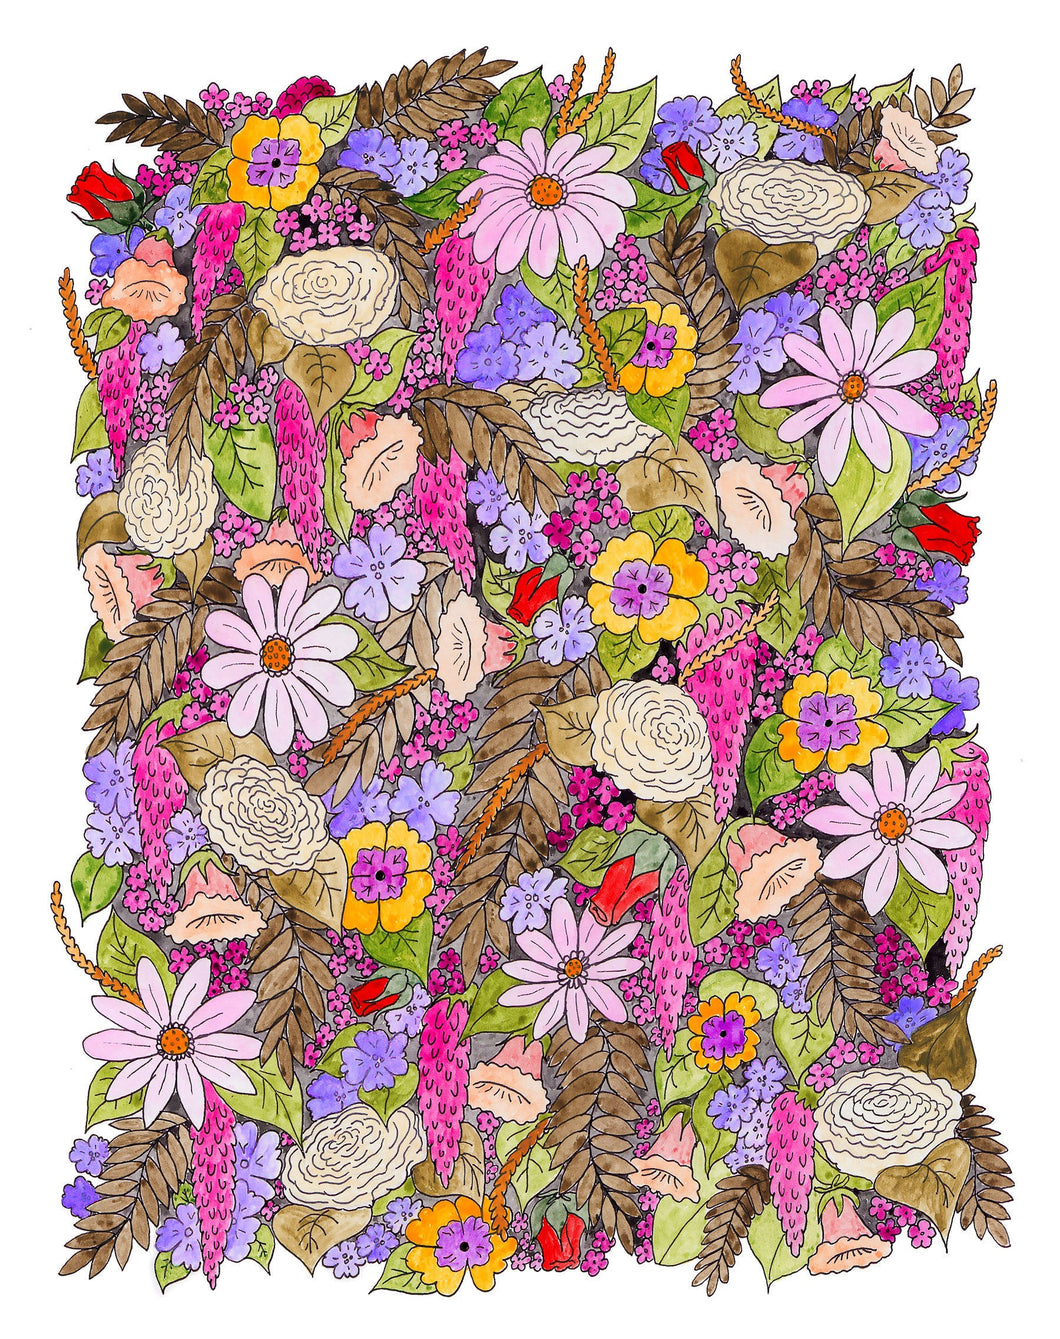 Bed of flowers print